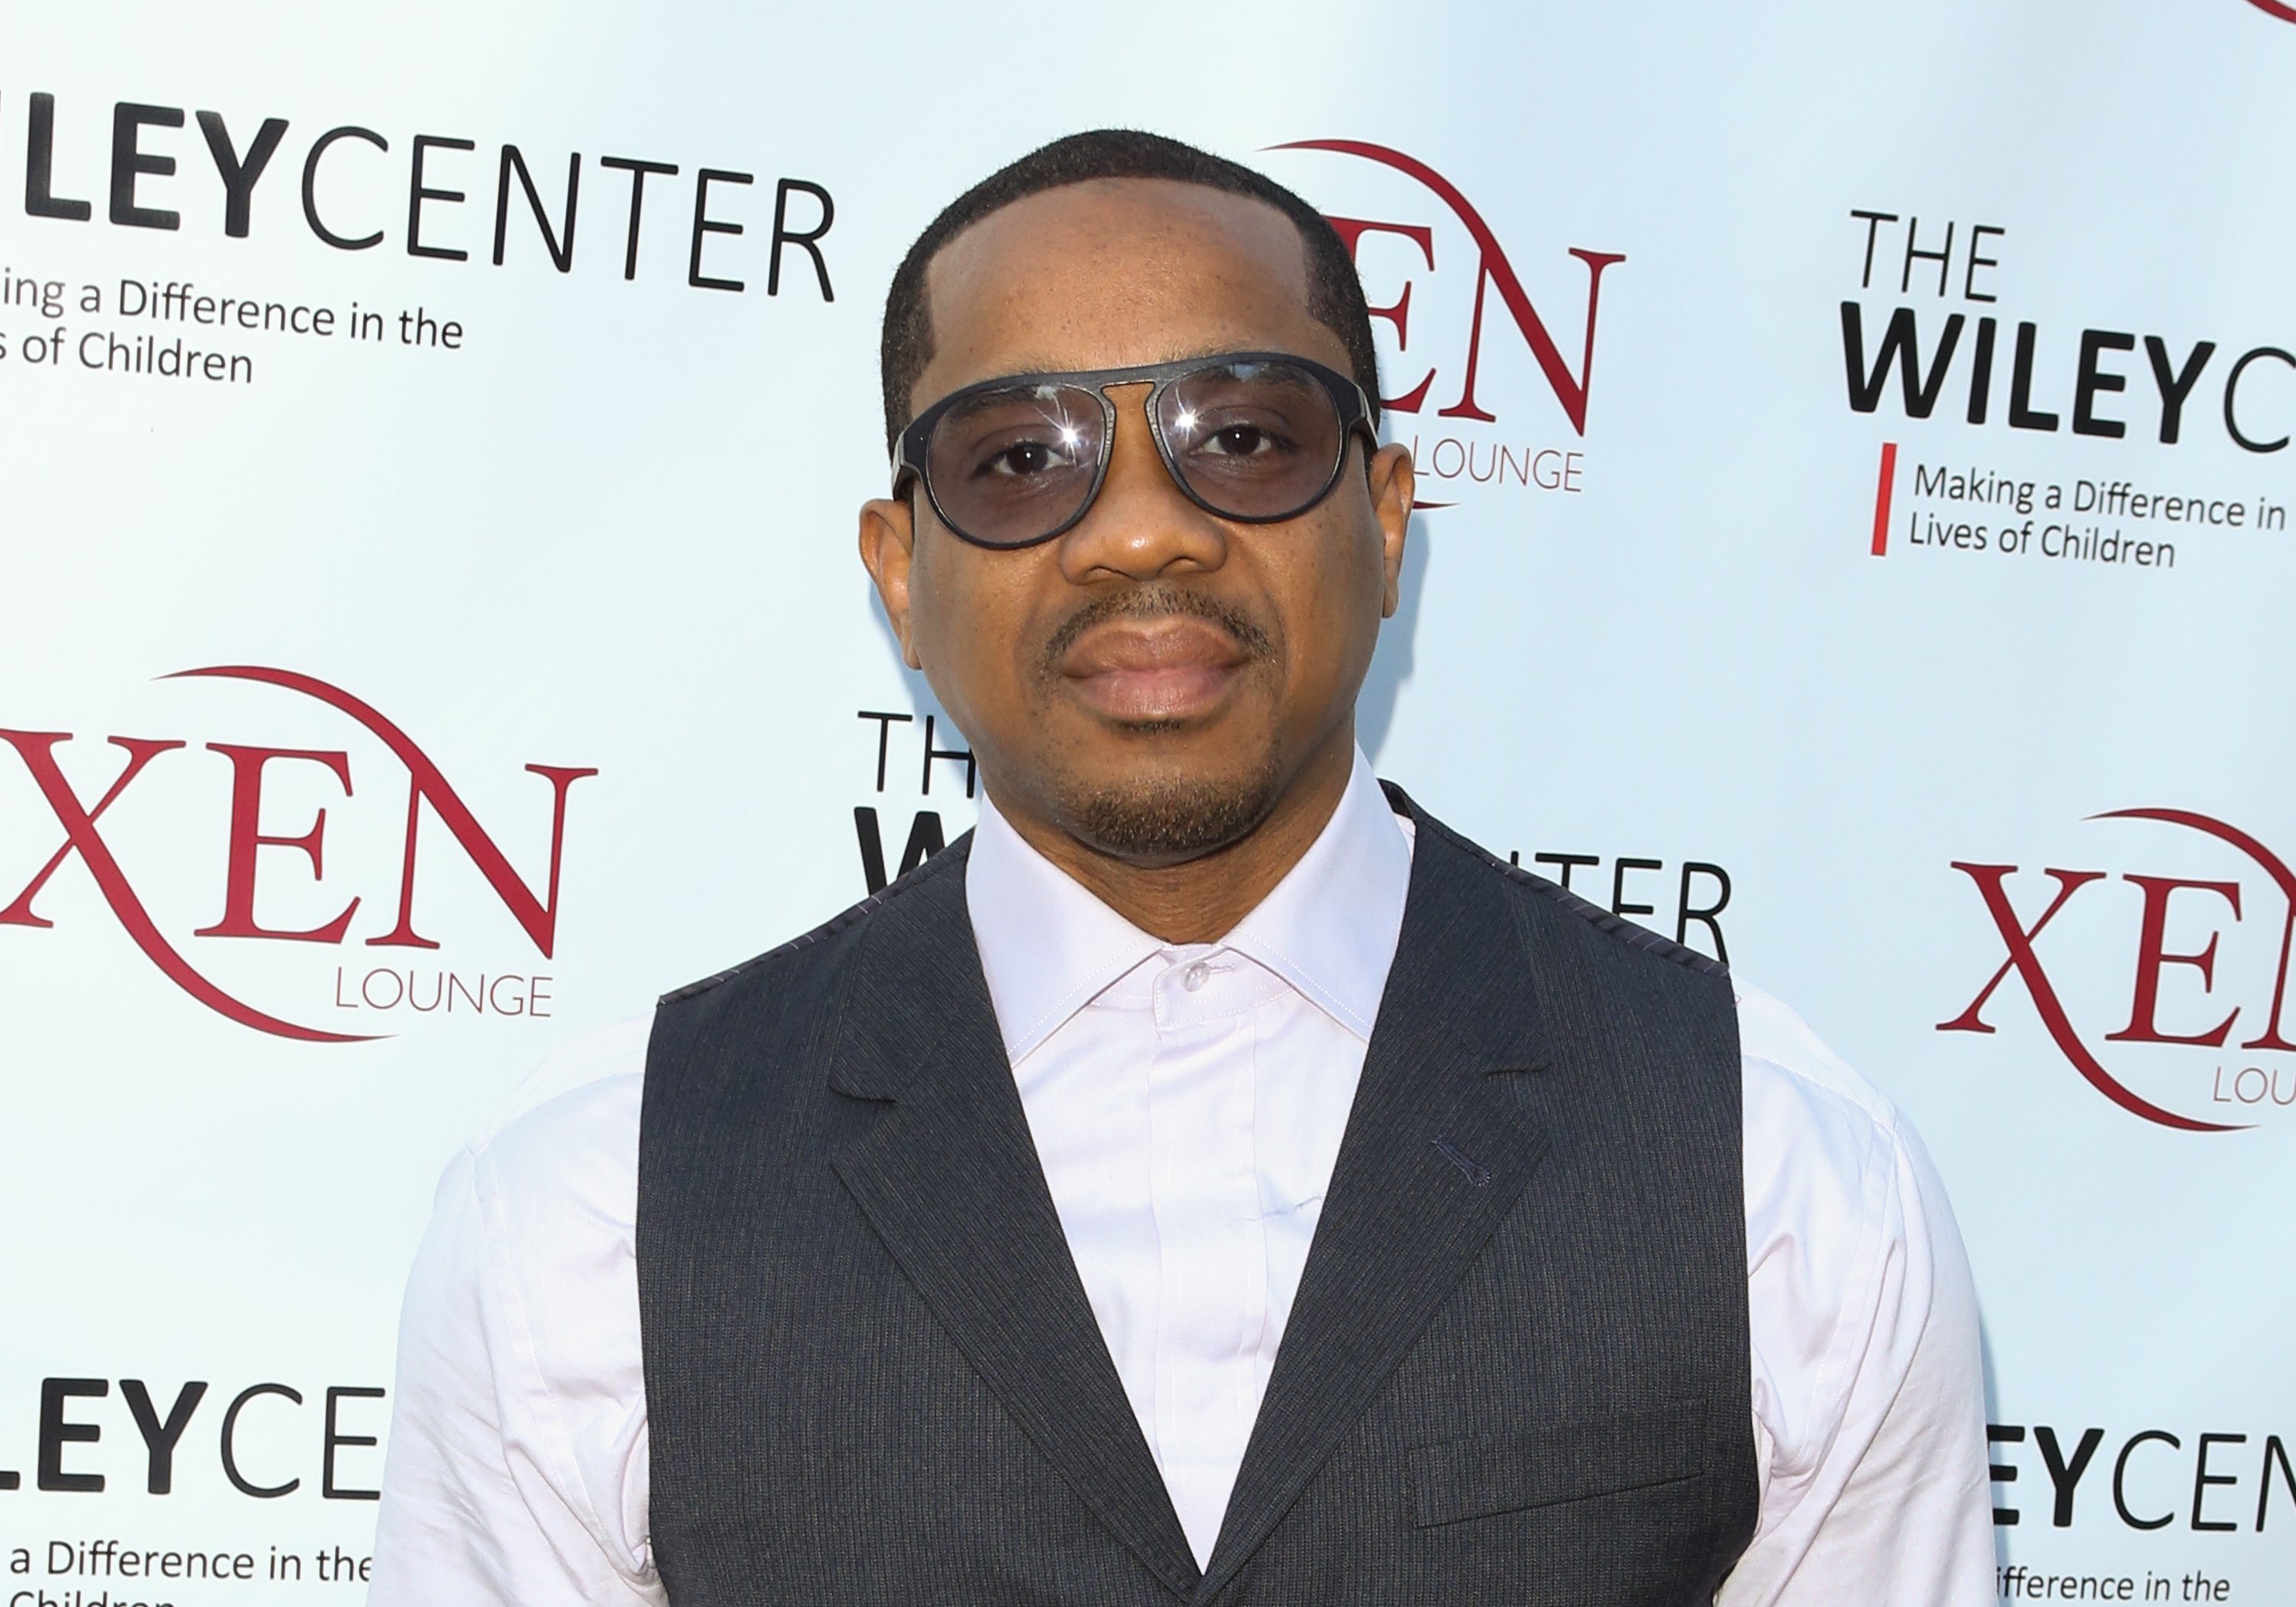 Duane Martin at a benefit event for children with autism in April 2016. | Photo: Getty Images